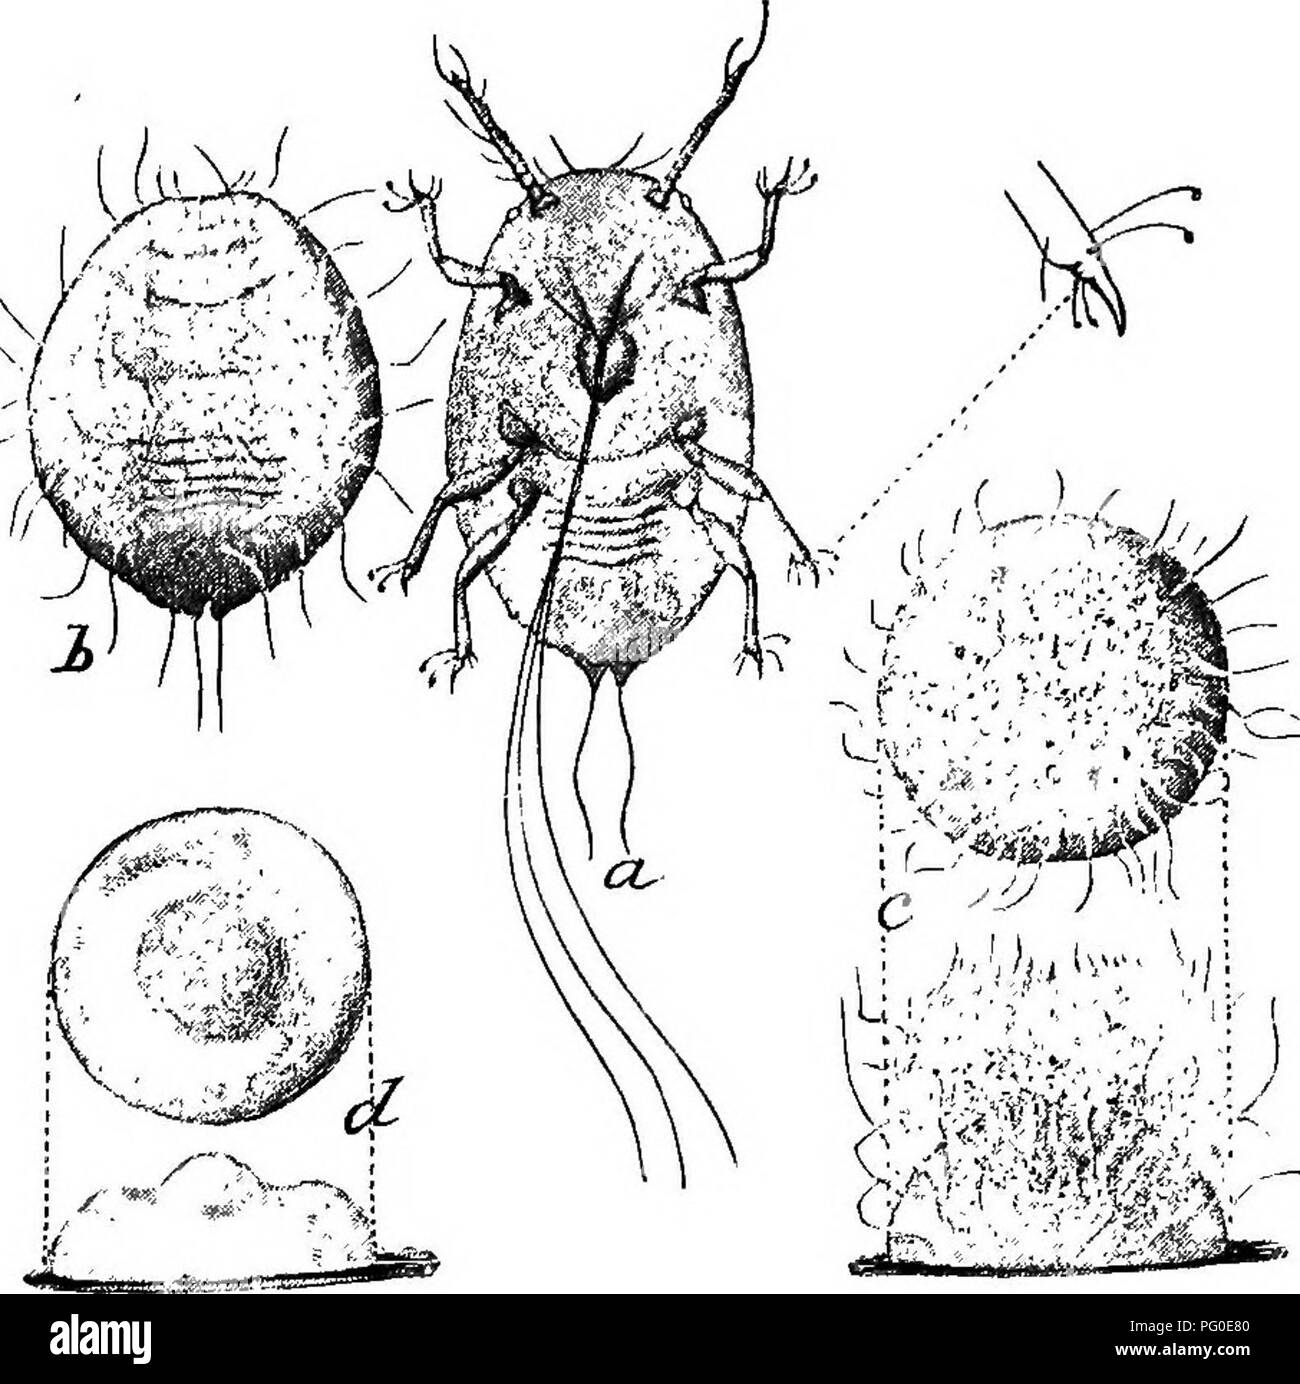 . Insect pests and plant diseases : containing remedies and suggestions recommended for adoption by farmers, fruit-growers, and gardeners of the province . Pests; Fungal diseases of plants; Insect pests. 18 Provincial Board of Horticqlture. 1897. a  ^^f'^ (Fig. 3.) Young larvae and developing scale ; (a), ventral view of larva showing sucking beak with setse separated with enlarged tarsal claw at right; (6), dorsal view of same somewhat contracted, with the first waxy filaments appearing; (c), dorsal and lateral view of same still more contracted, illustrating further development of wax secre Stock Photo